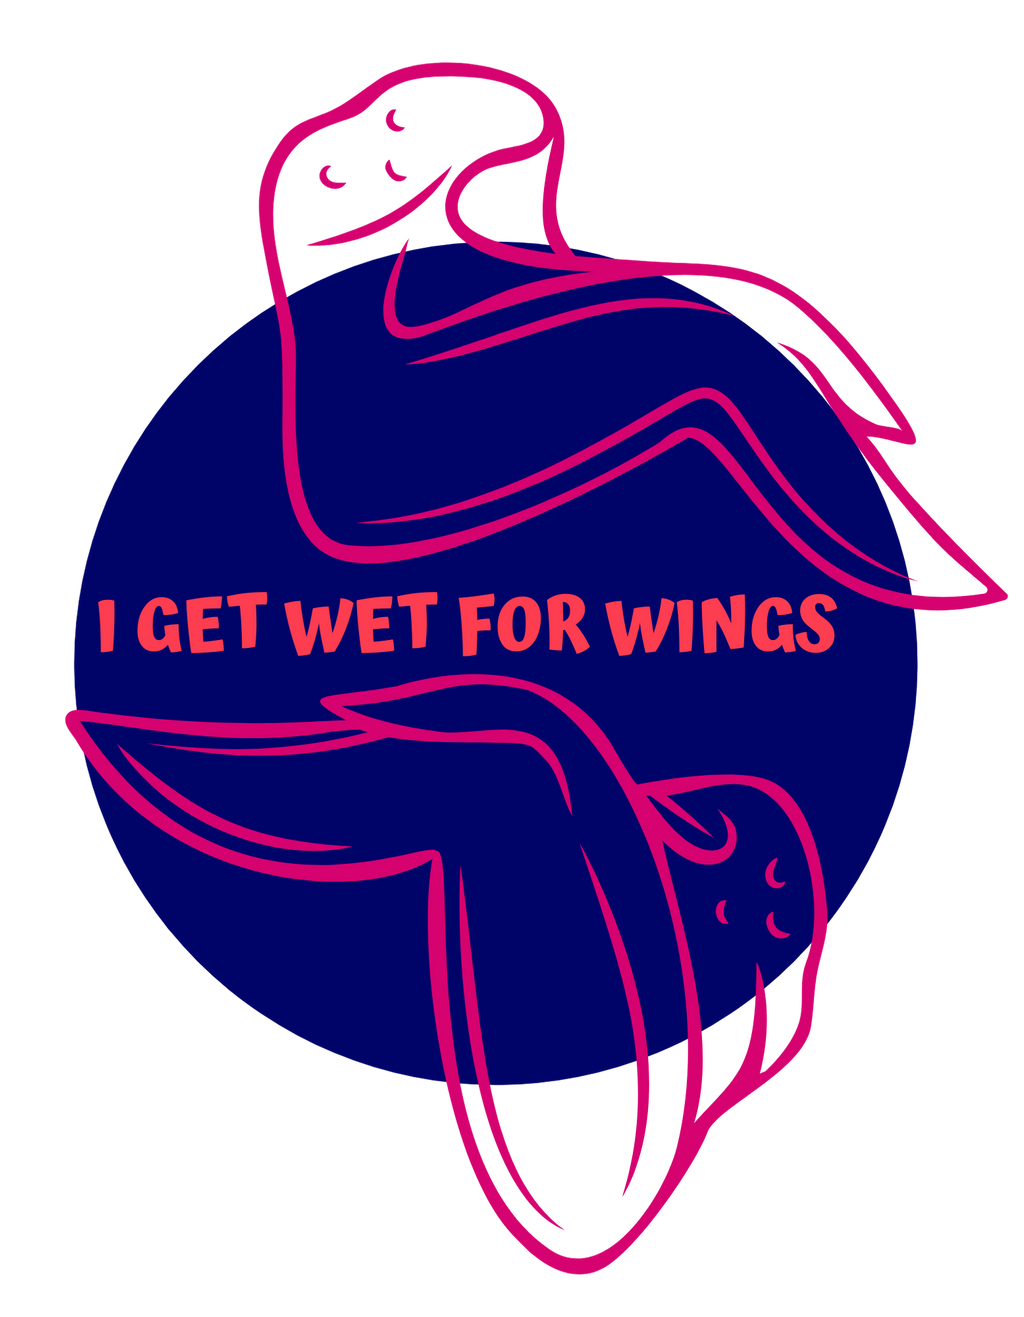 Get Wet For Wings